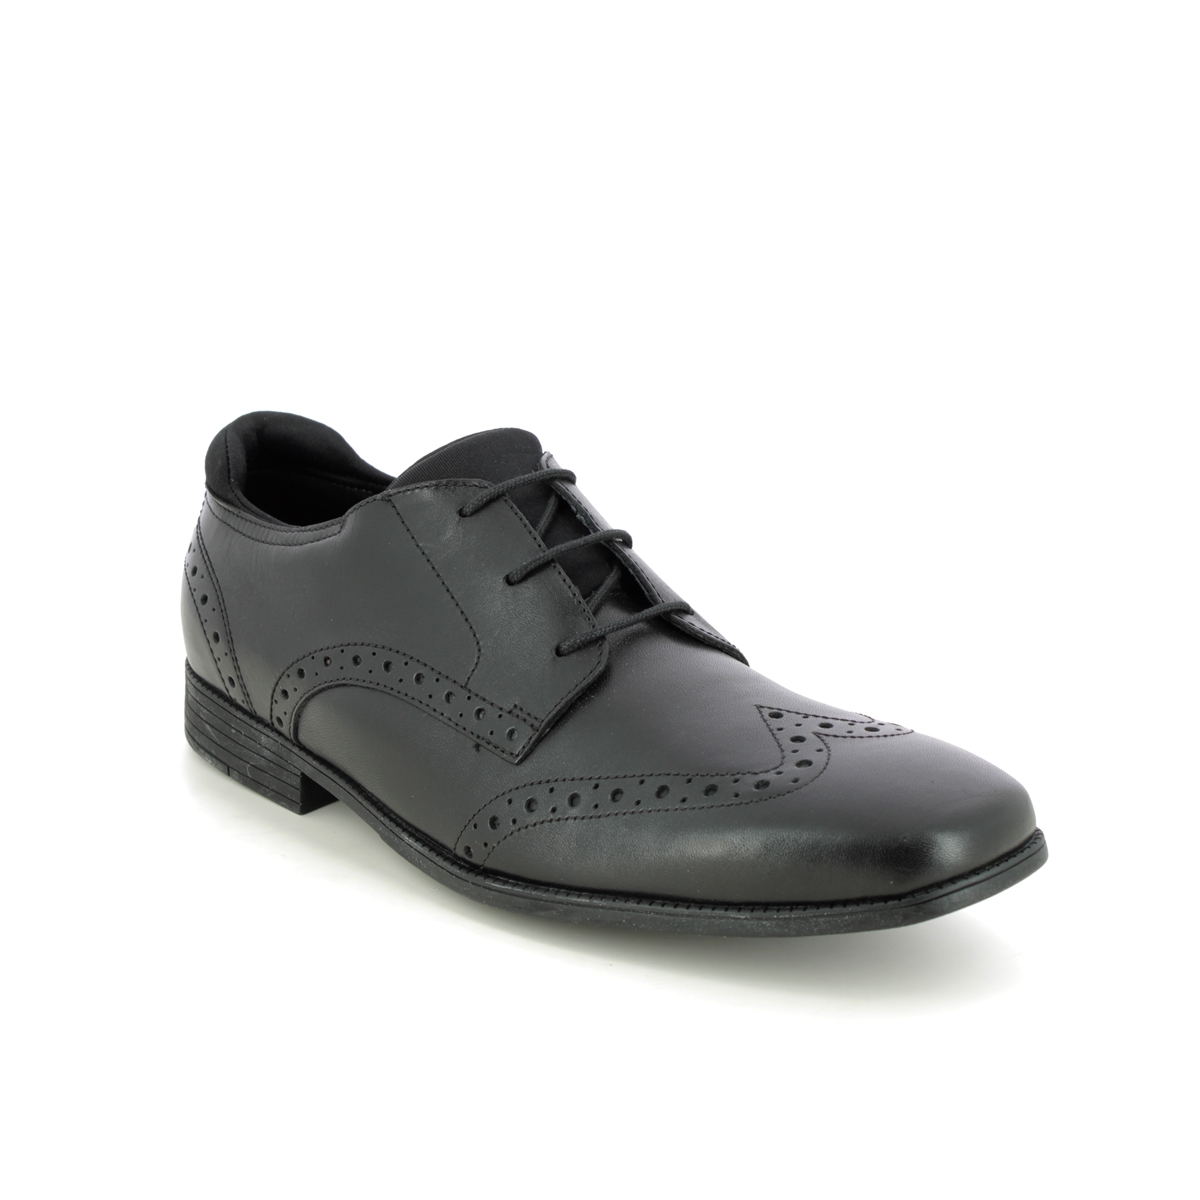 Start Rite - Tailor In Black Leather 3513-76F In Size 9 In Plain Black Leather For School Boys Shoes  In Black Leather For kids